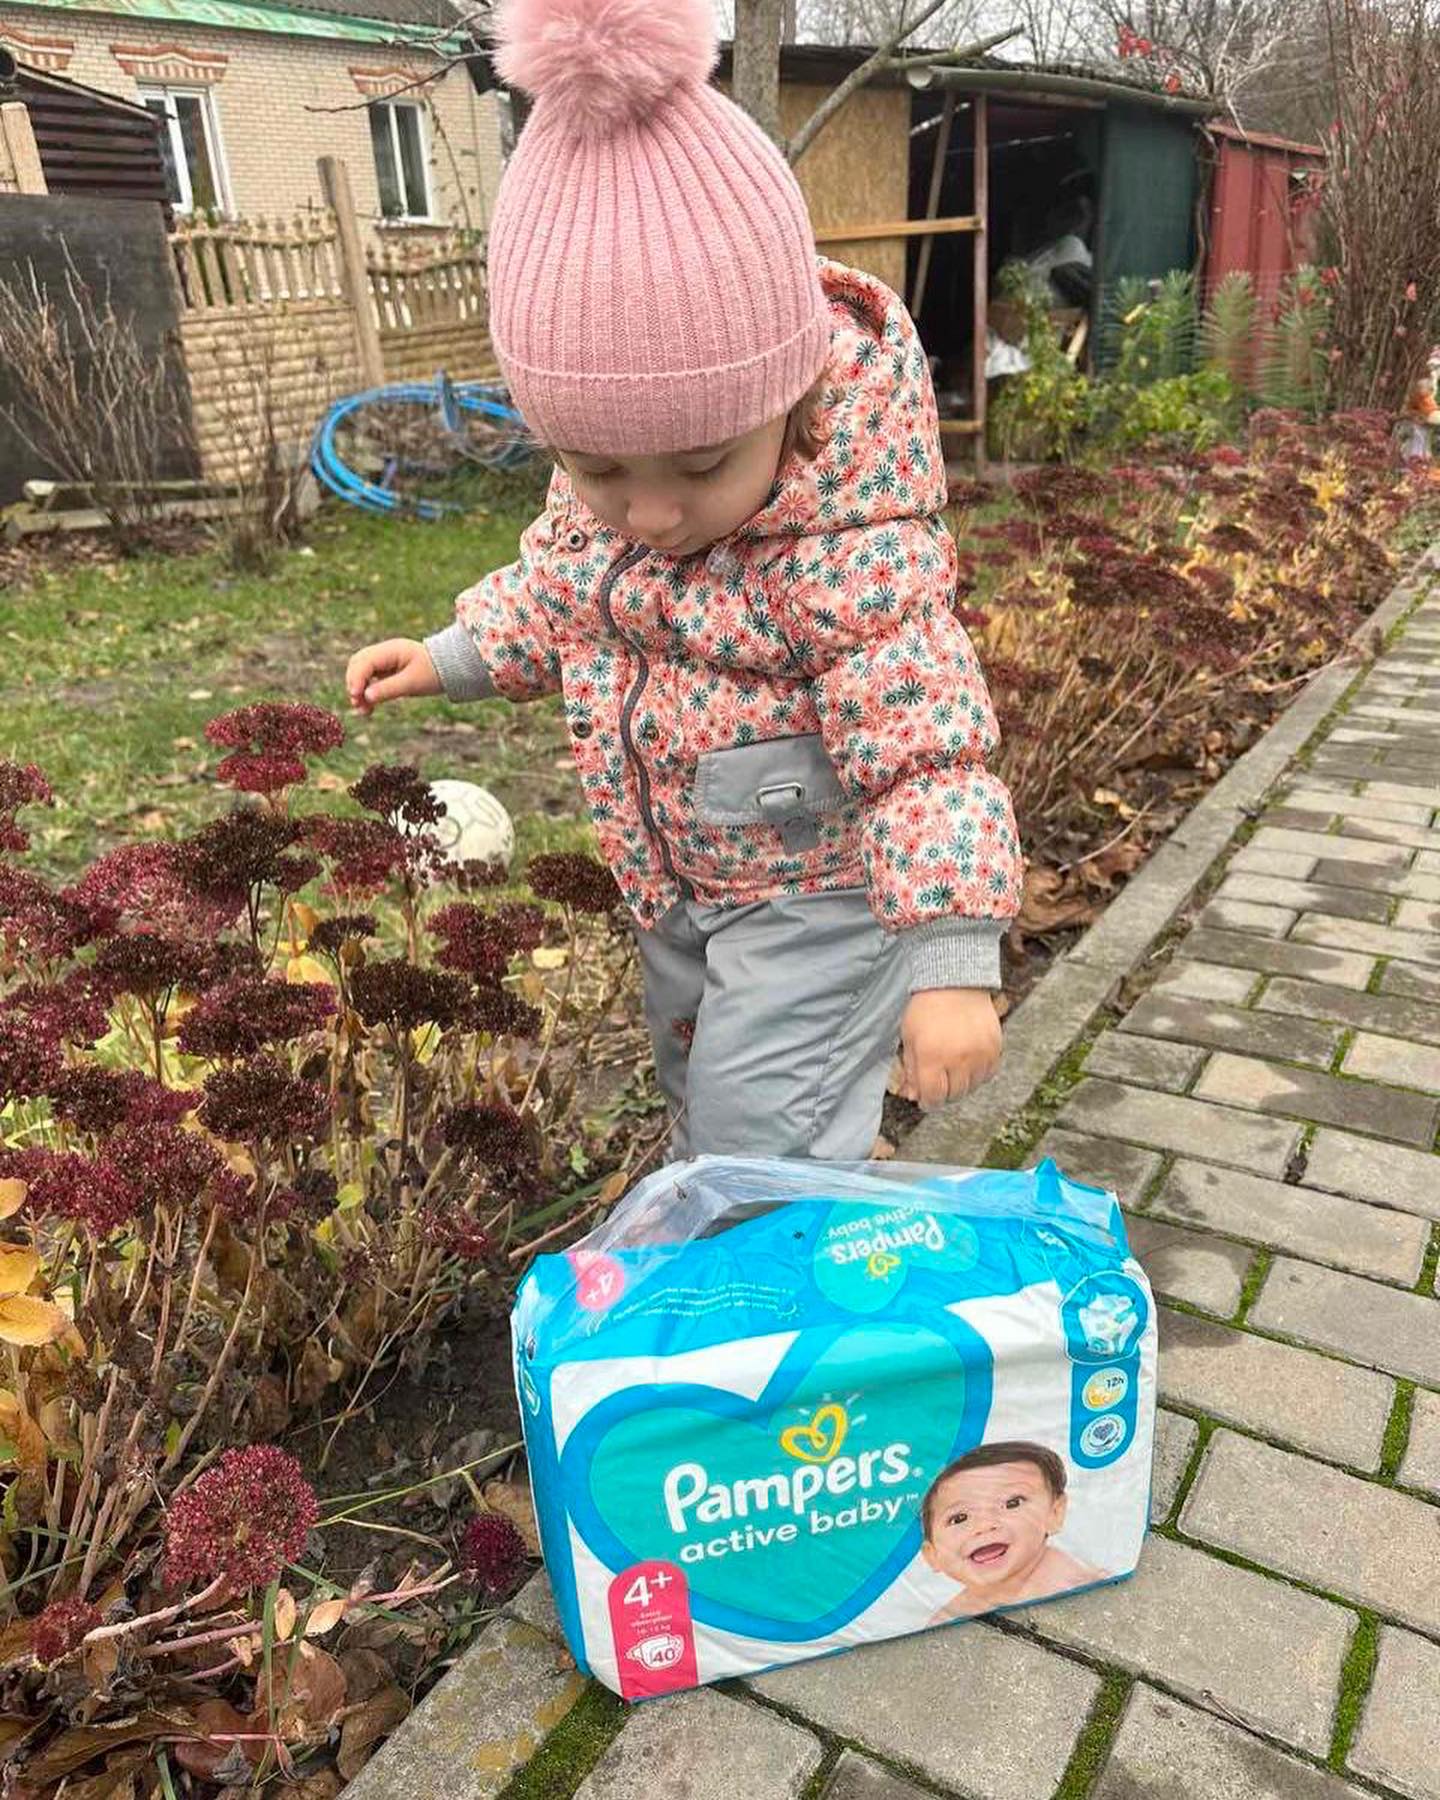 A little girl is standing next to a box of pampers diapers.